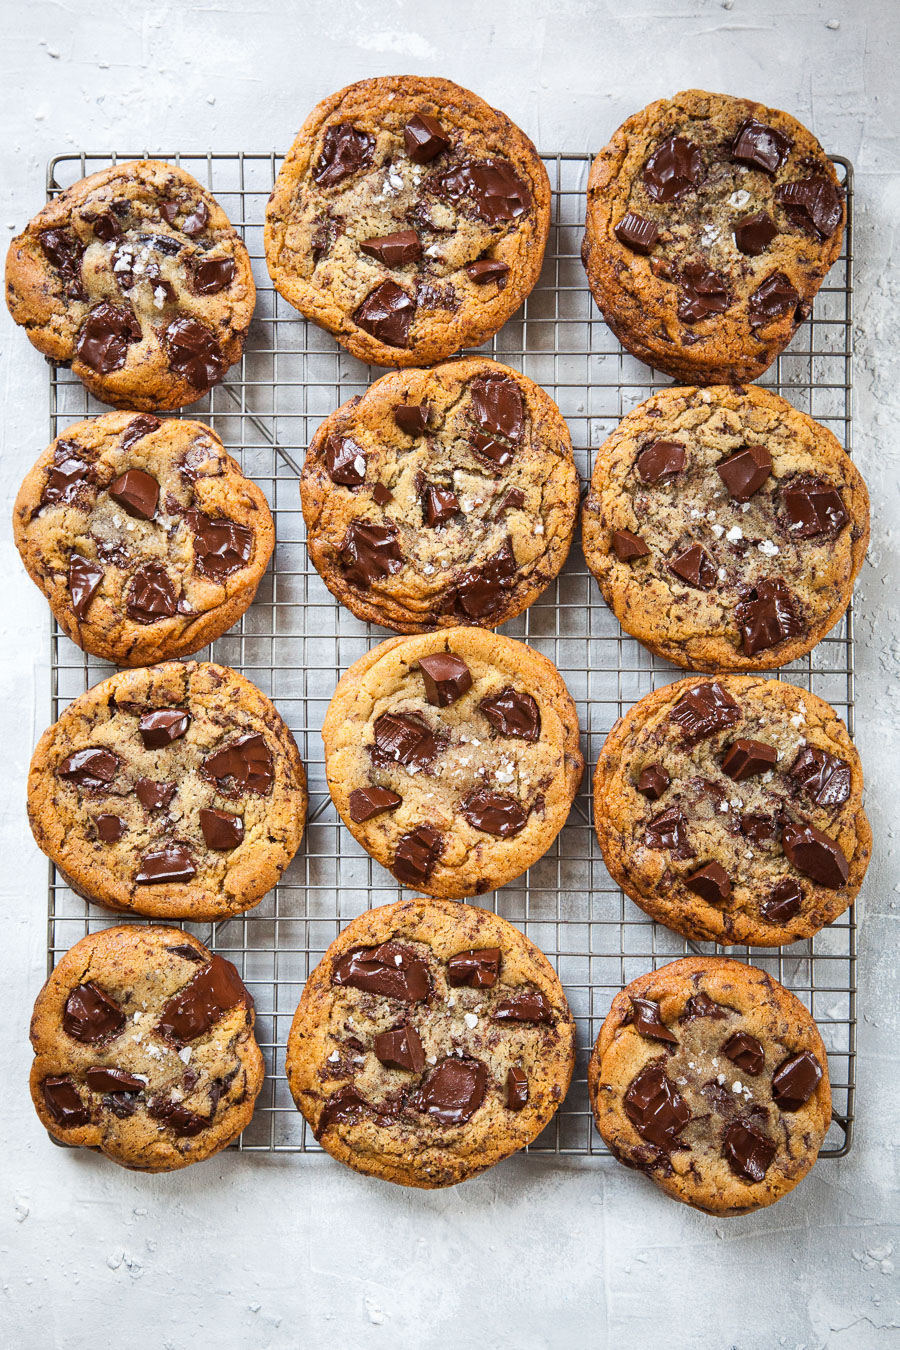 https://www.eatthelove.com/bakery-style-chocolate-chip-cookies/